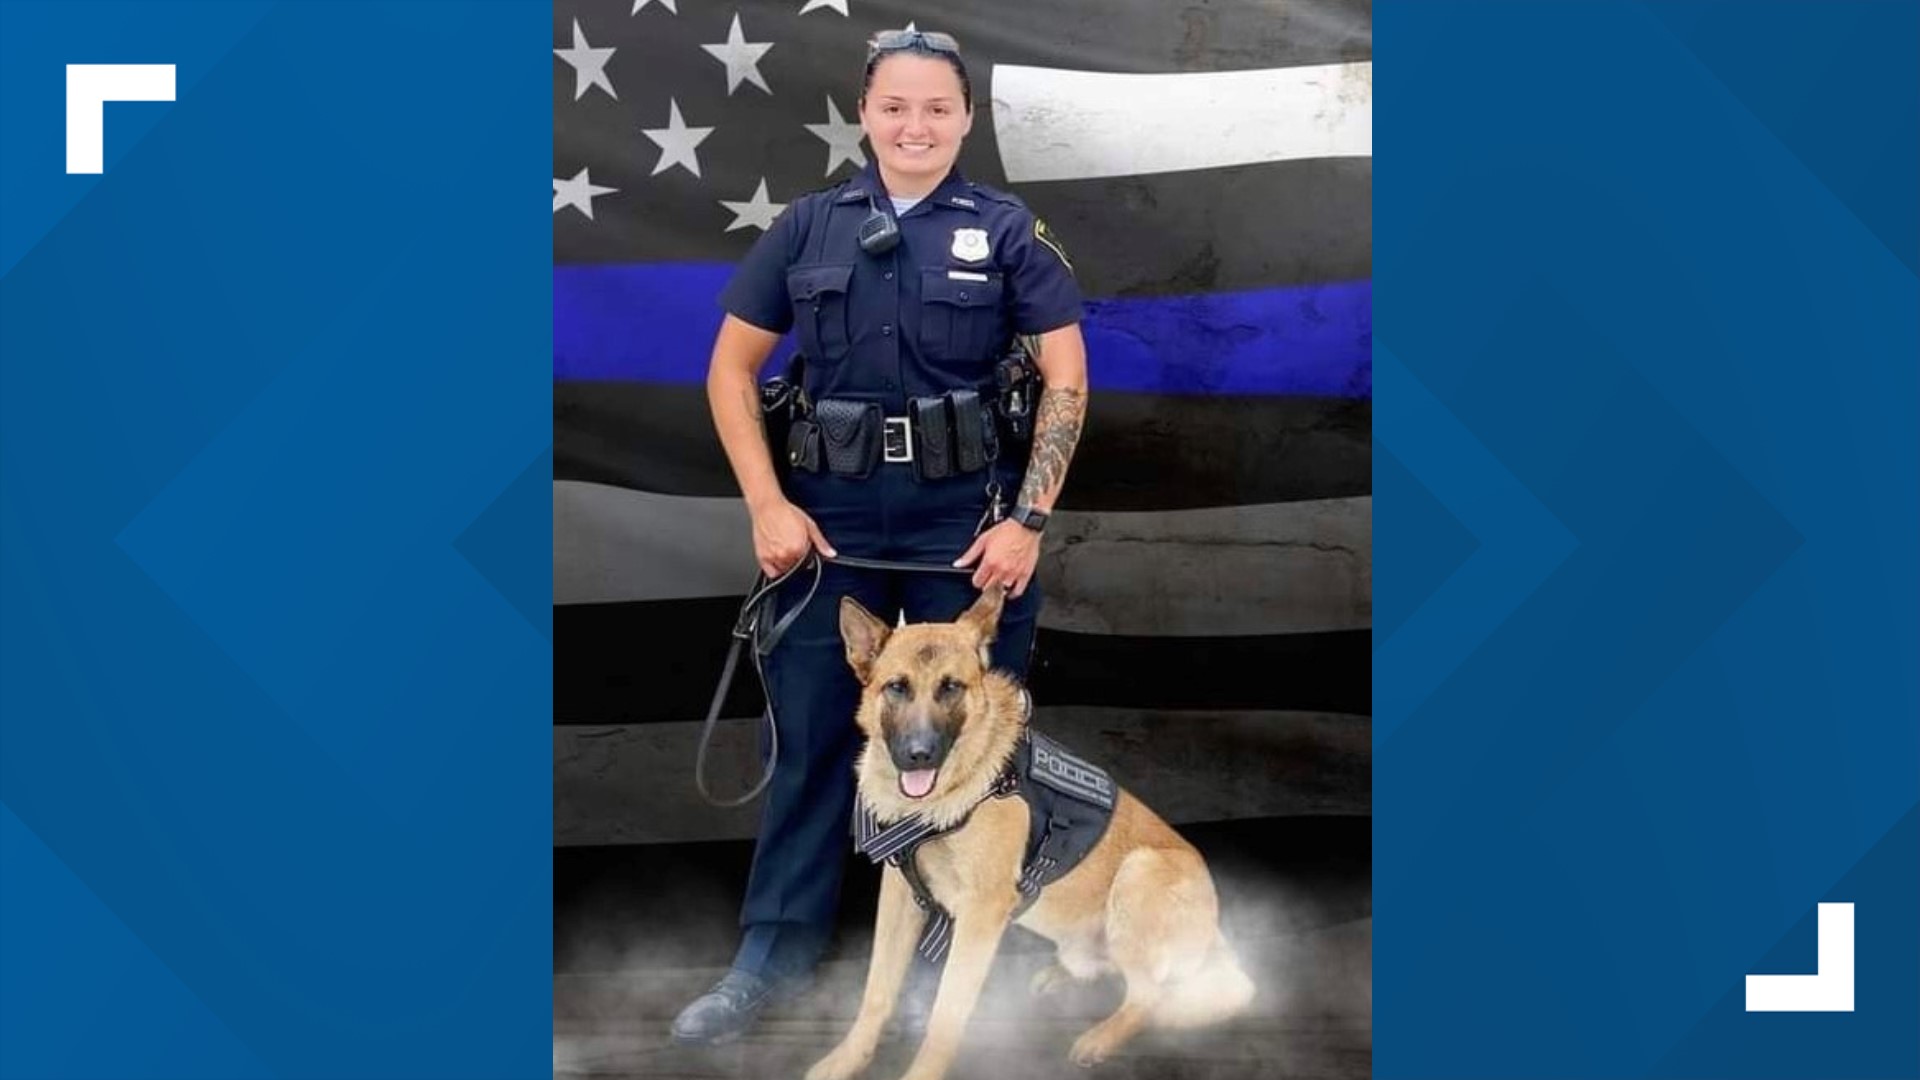 Officer Seara Burton was injured less than two weeks before her wedding, when a suspect shot her at a traffic stop.